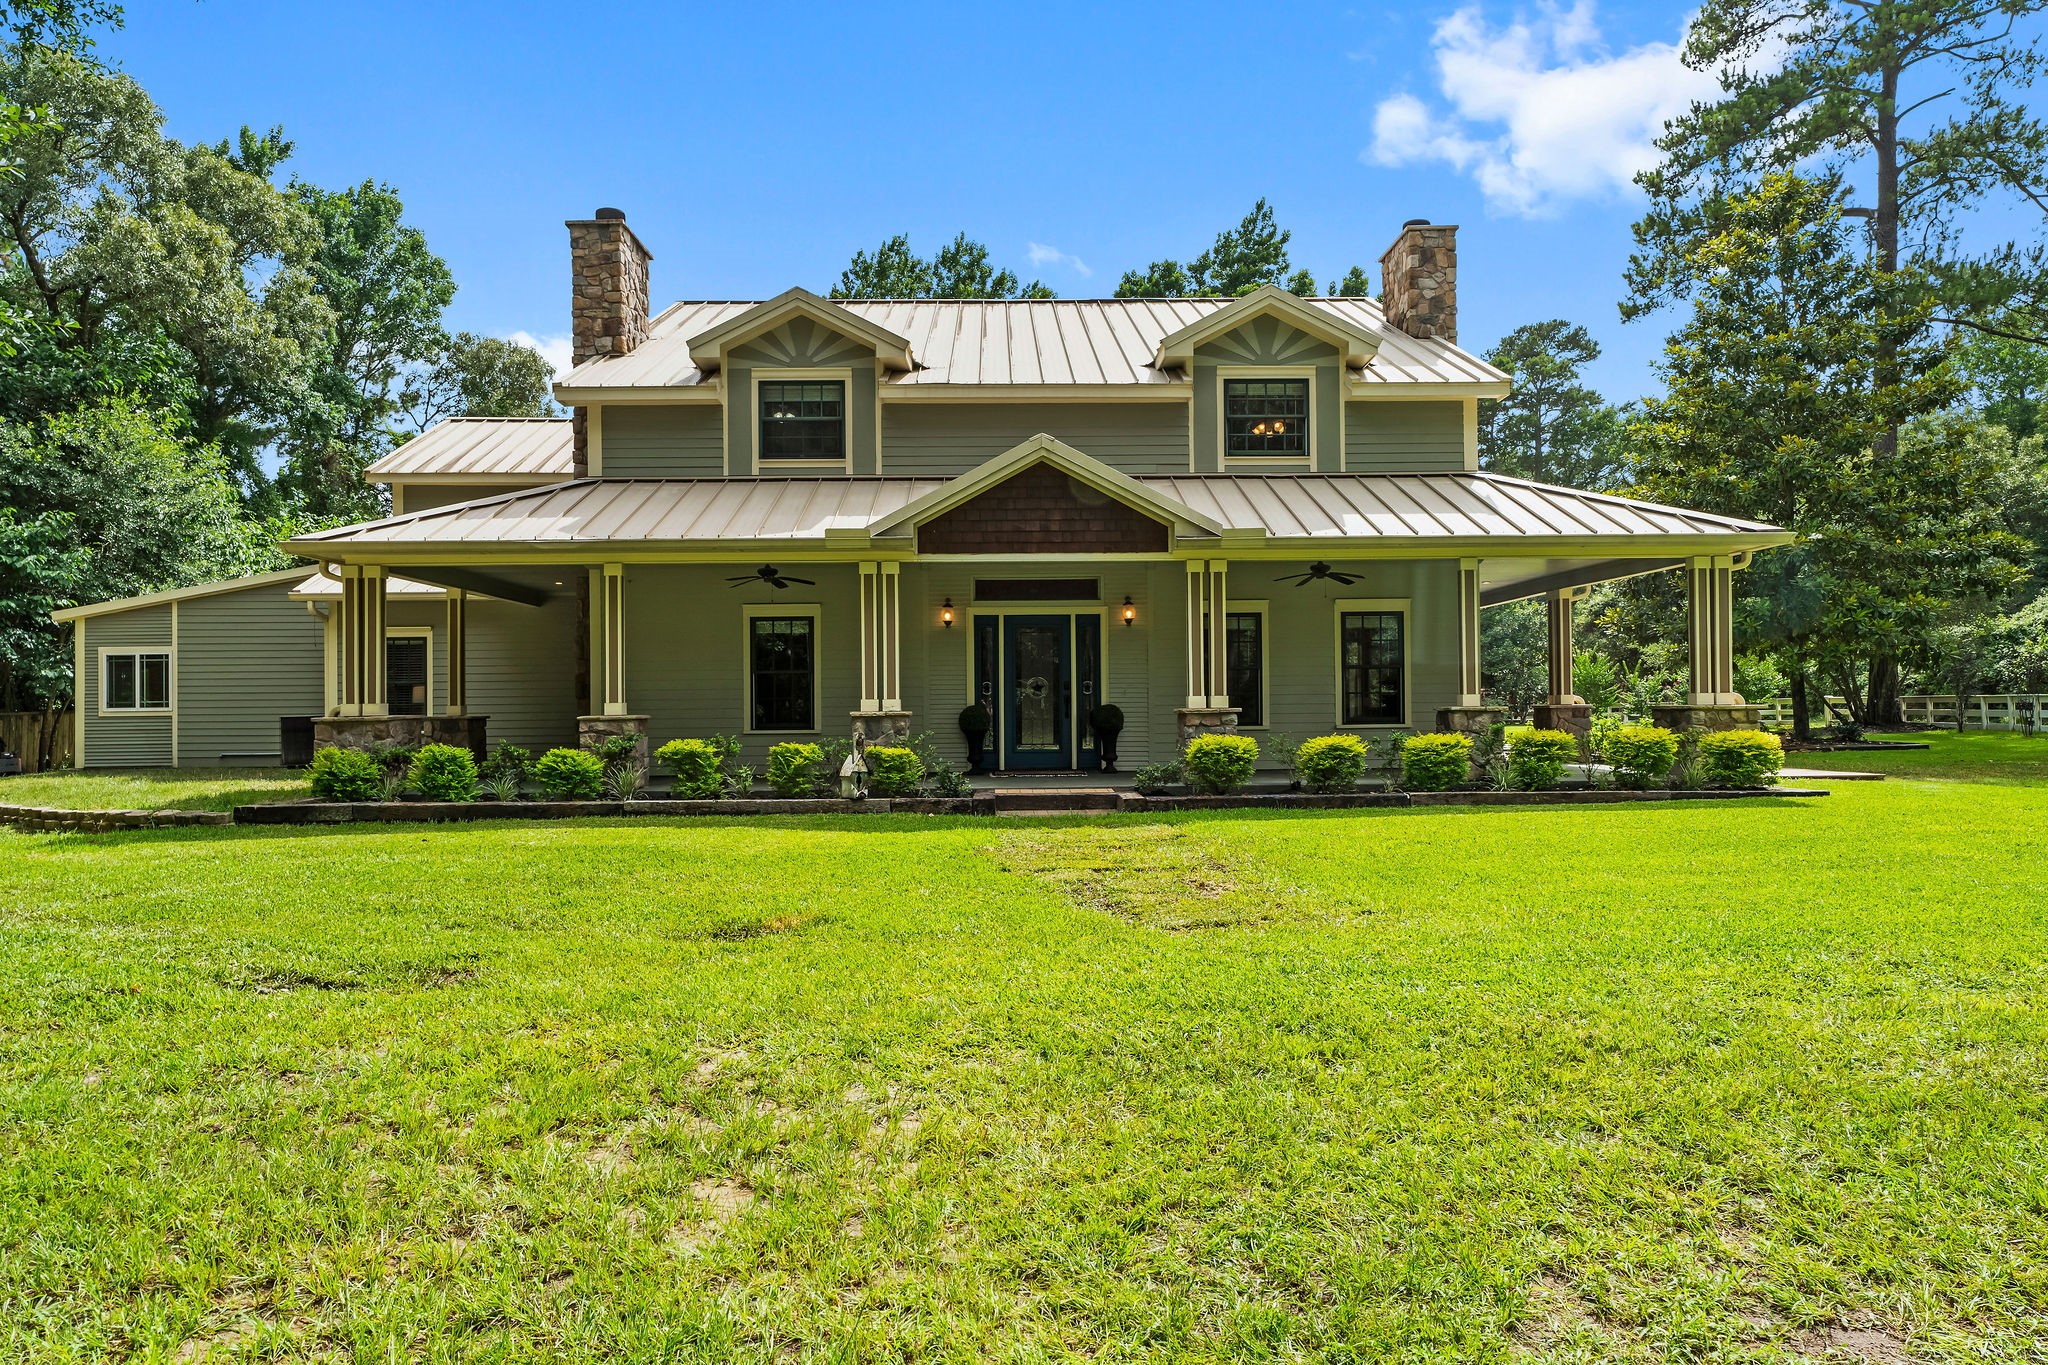 Welcome to this 4715 SF craftsman style steel framed house situated on 3.377 unrestricted acres